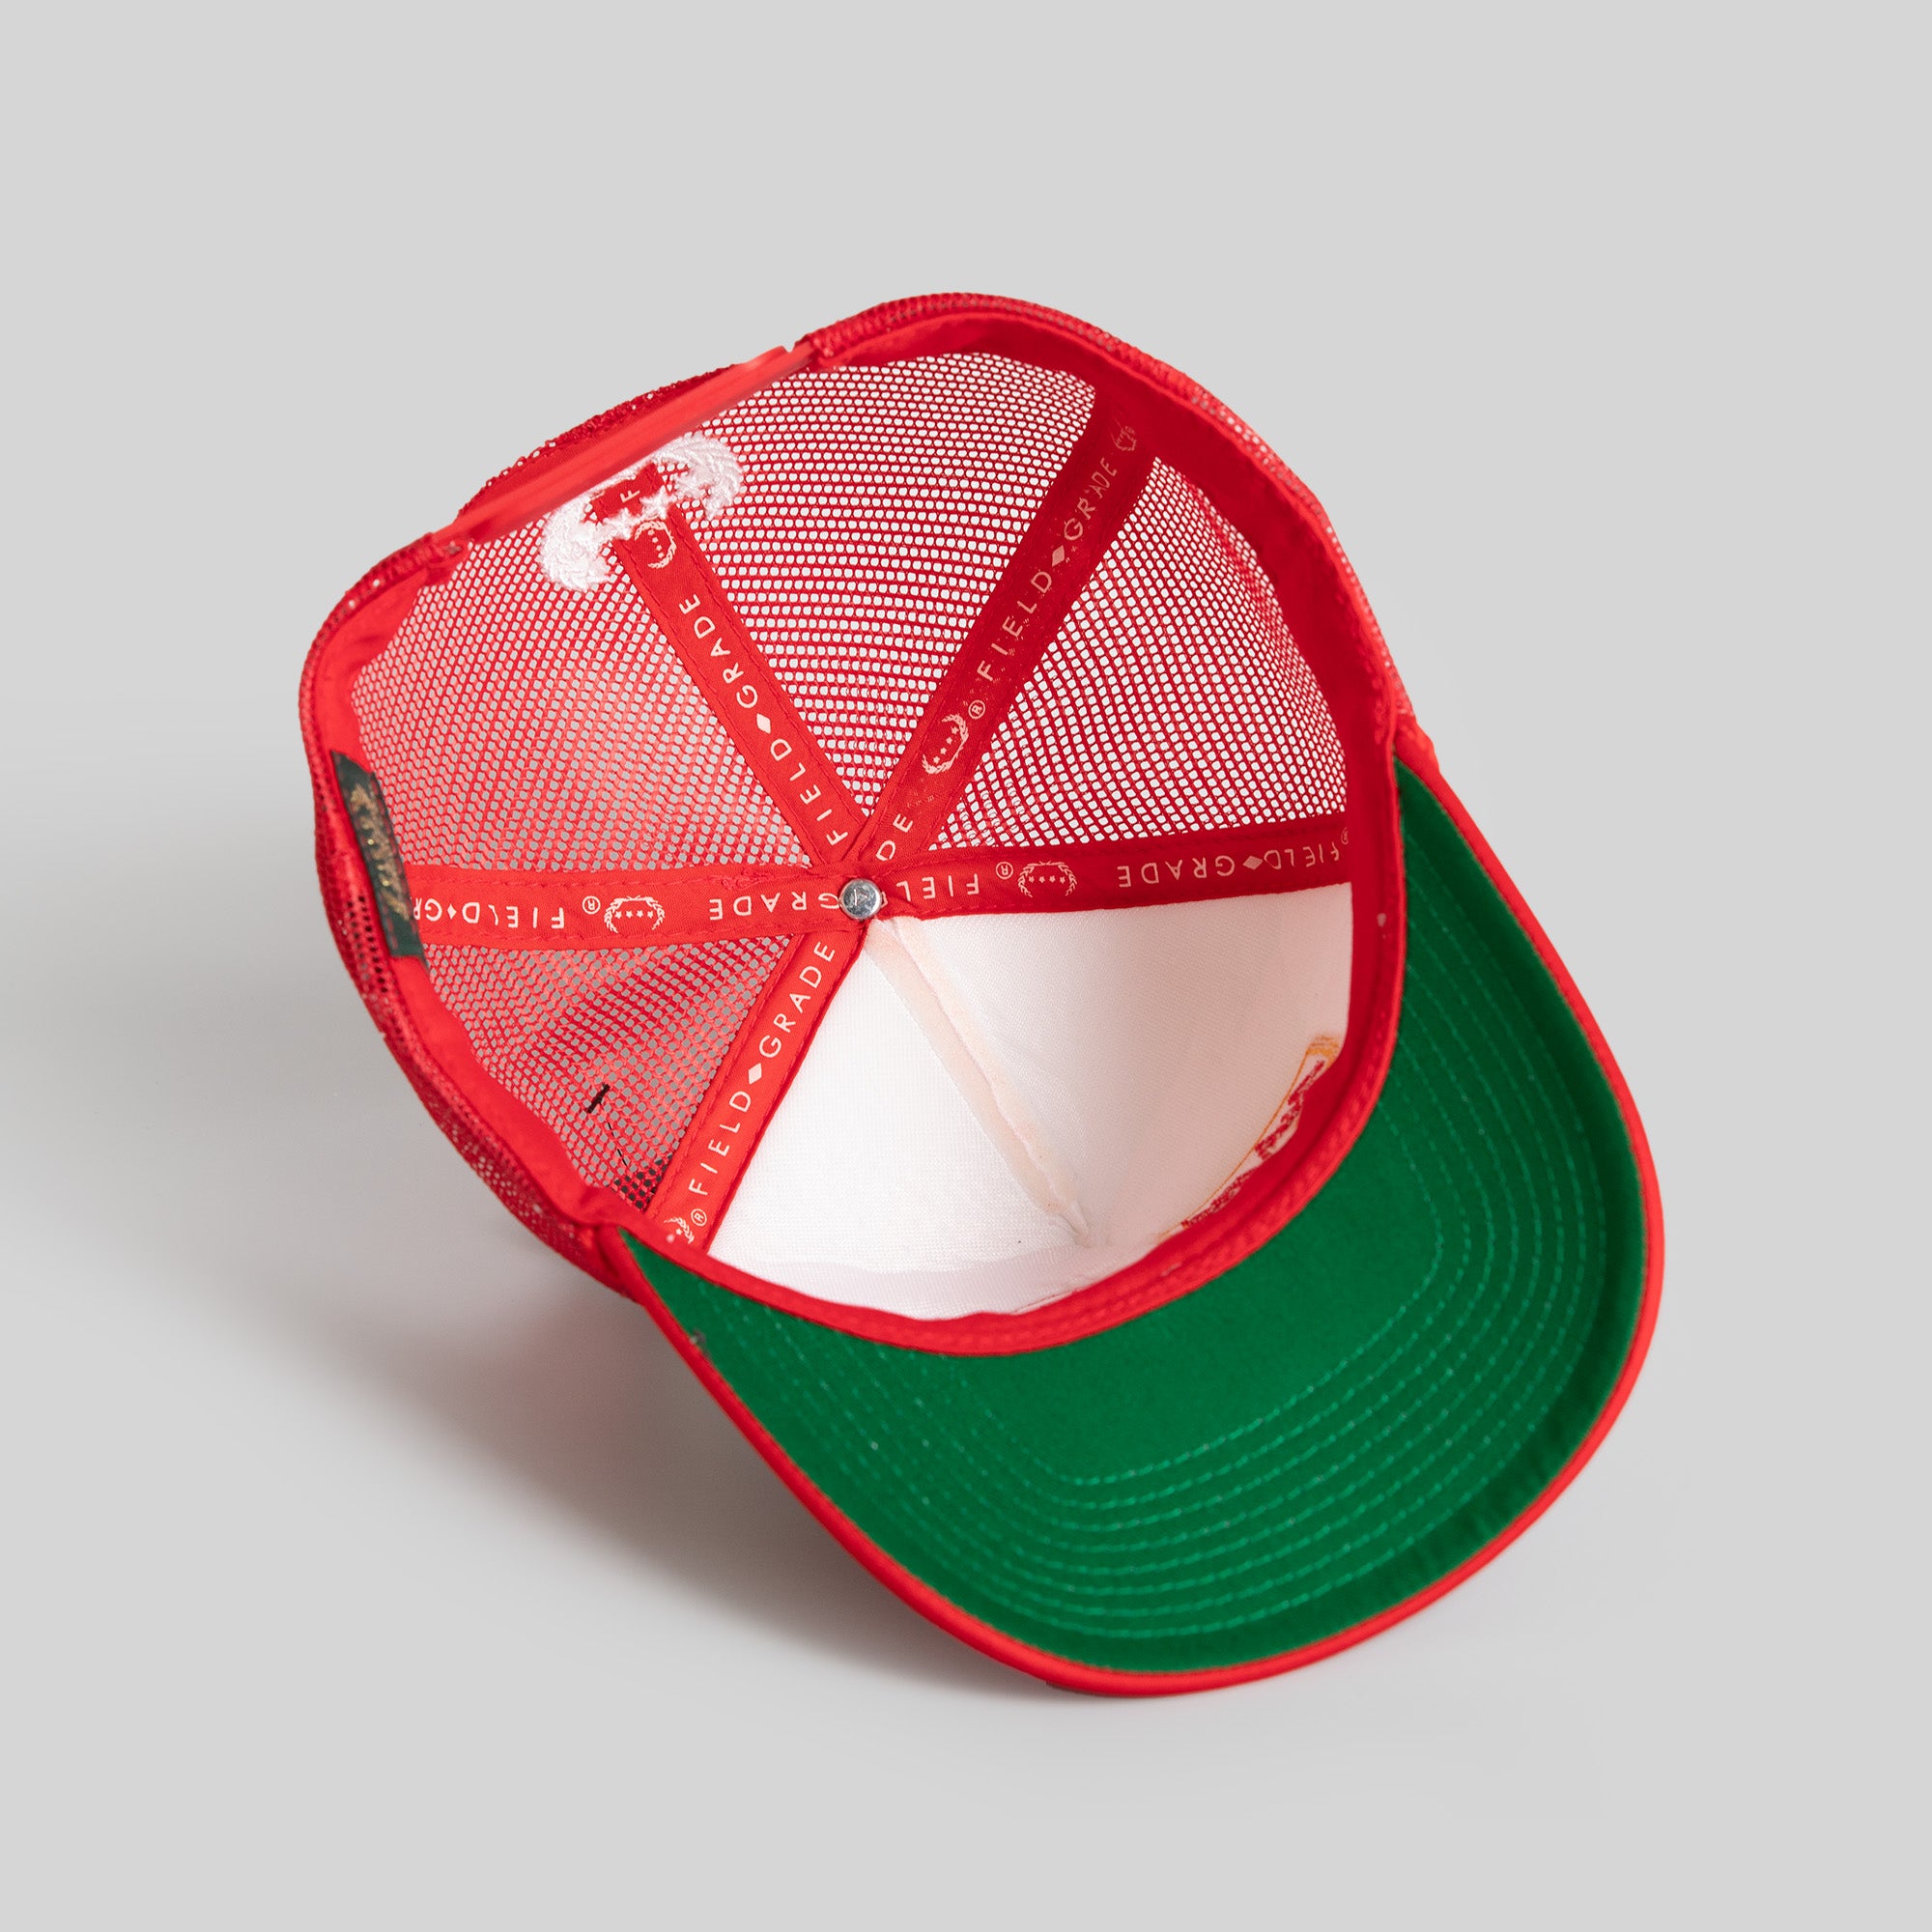 ASK ME WHITE RED TRUCKER HAT